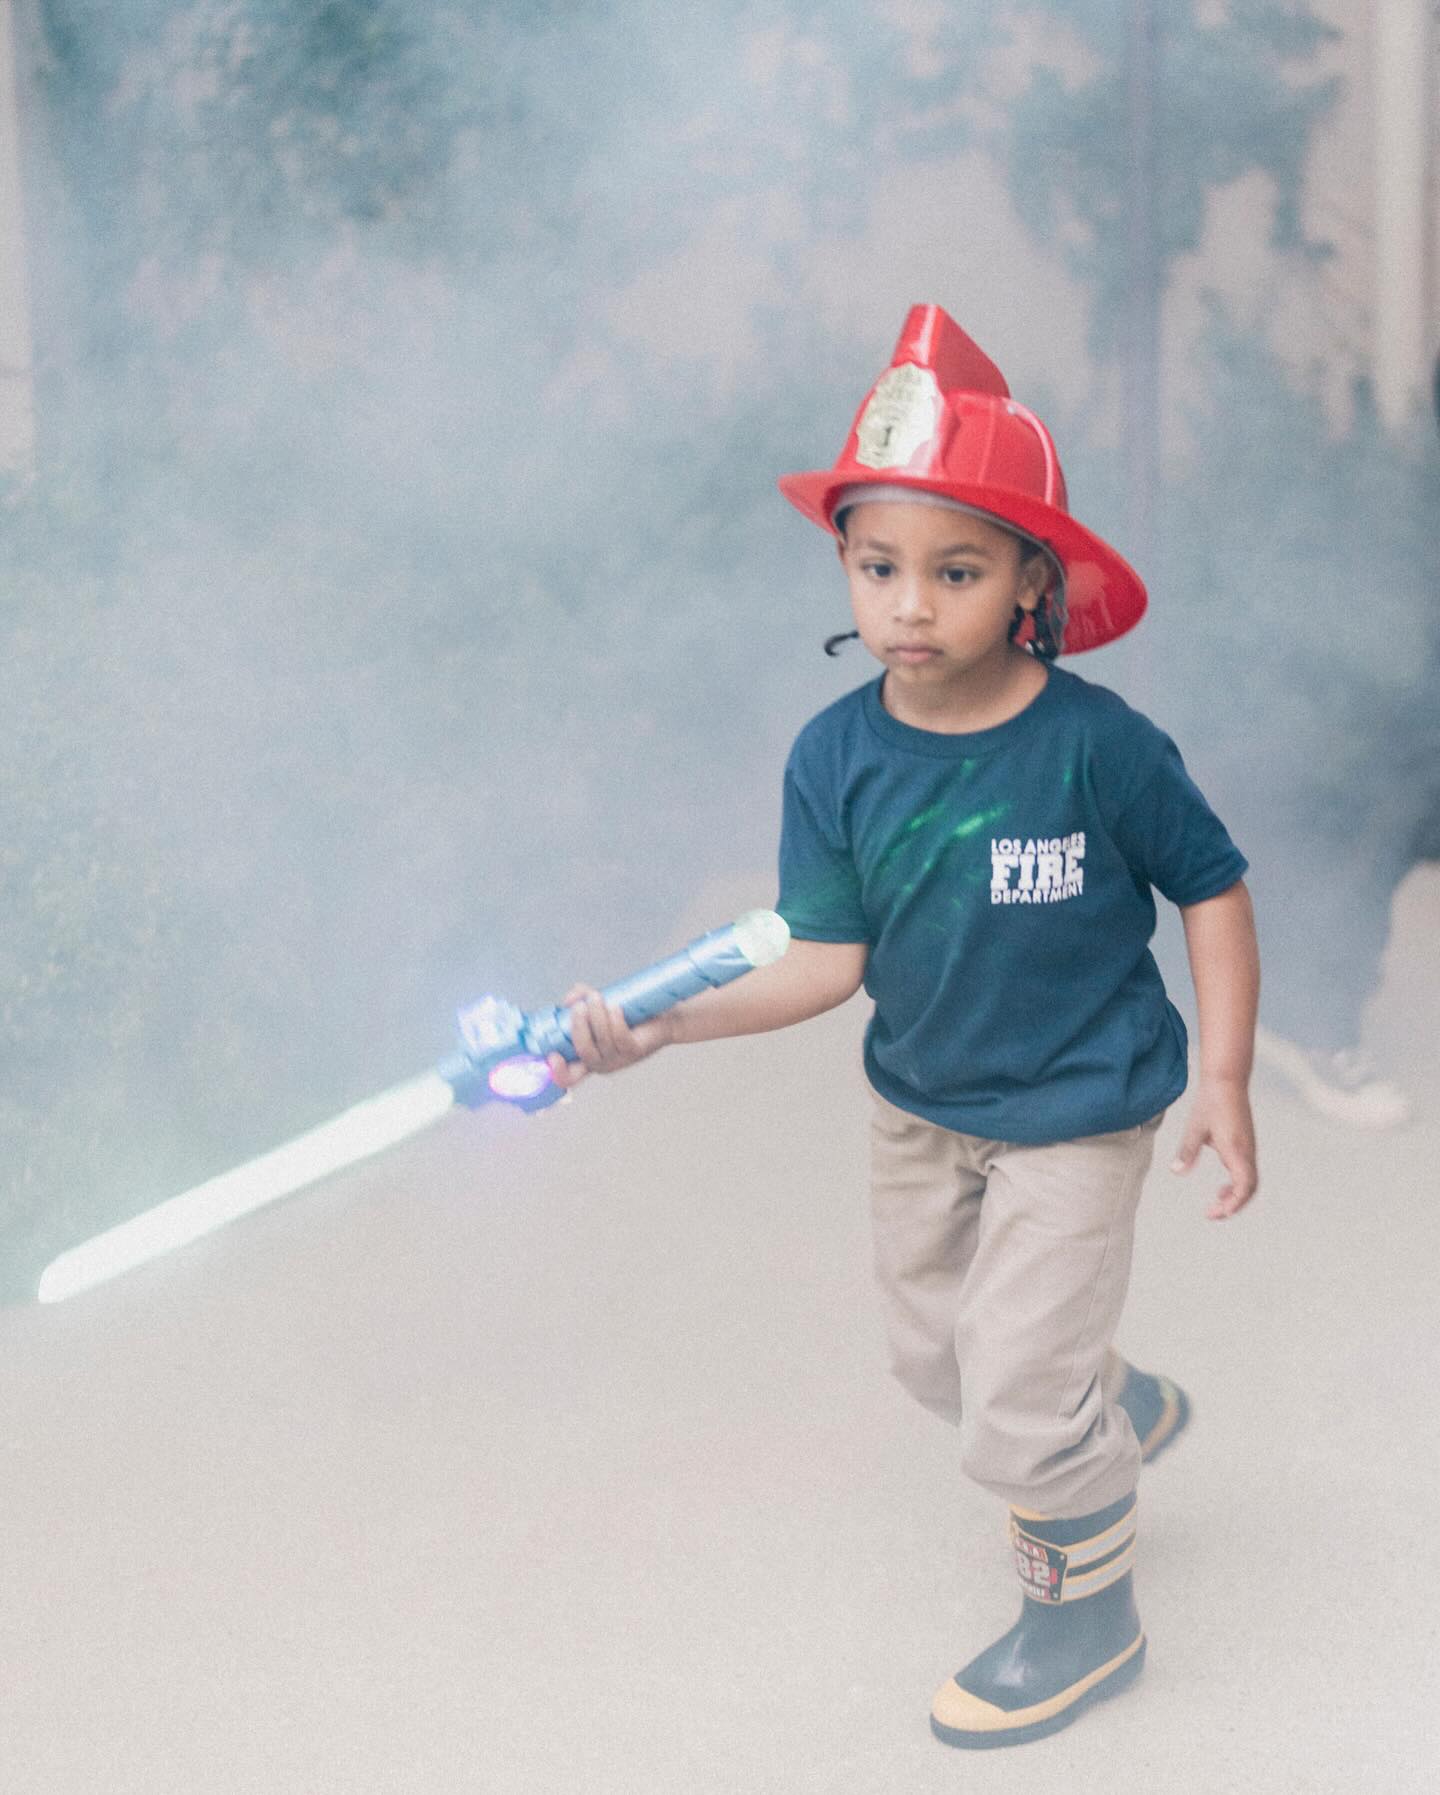 likhoa kim kardashian shares heartwarming halloween moments palm and chicago s ninja turtle and firefighter costumes steal the show 65472c6a569d9 Kim Kardashian Shares Heartwarming Halloween Moments Palm And Chicago's Ninja Turtle And Firefighter Costumes Steal The Show